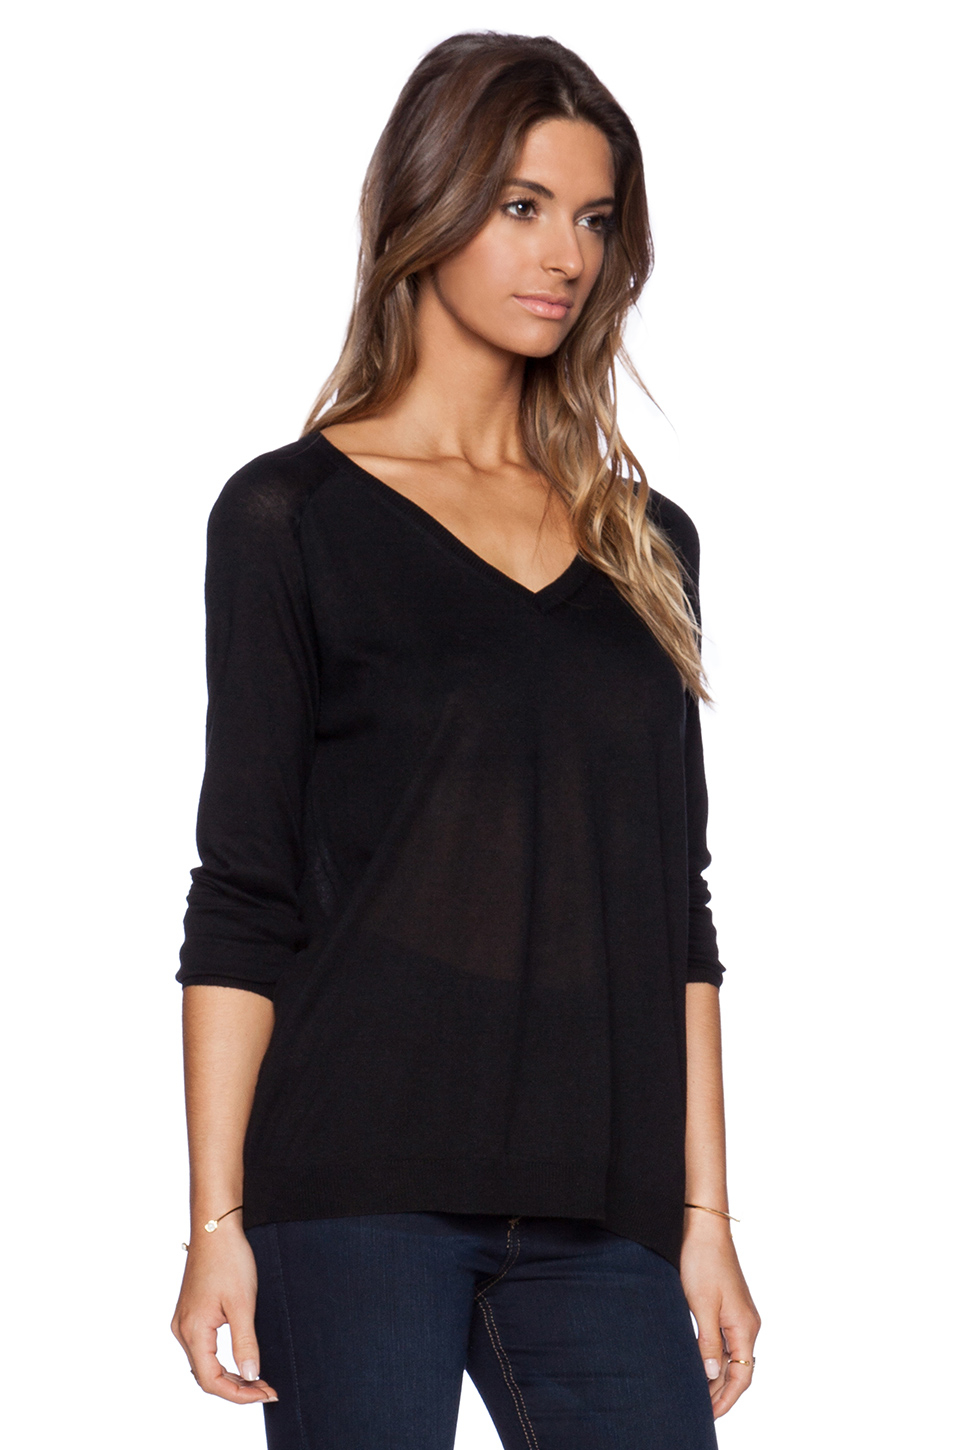 Lyst - Fine Collection Slouchy V Neck Sweater in Black